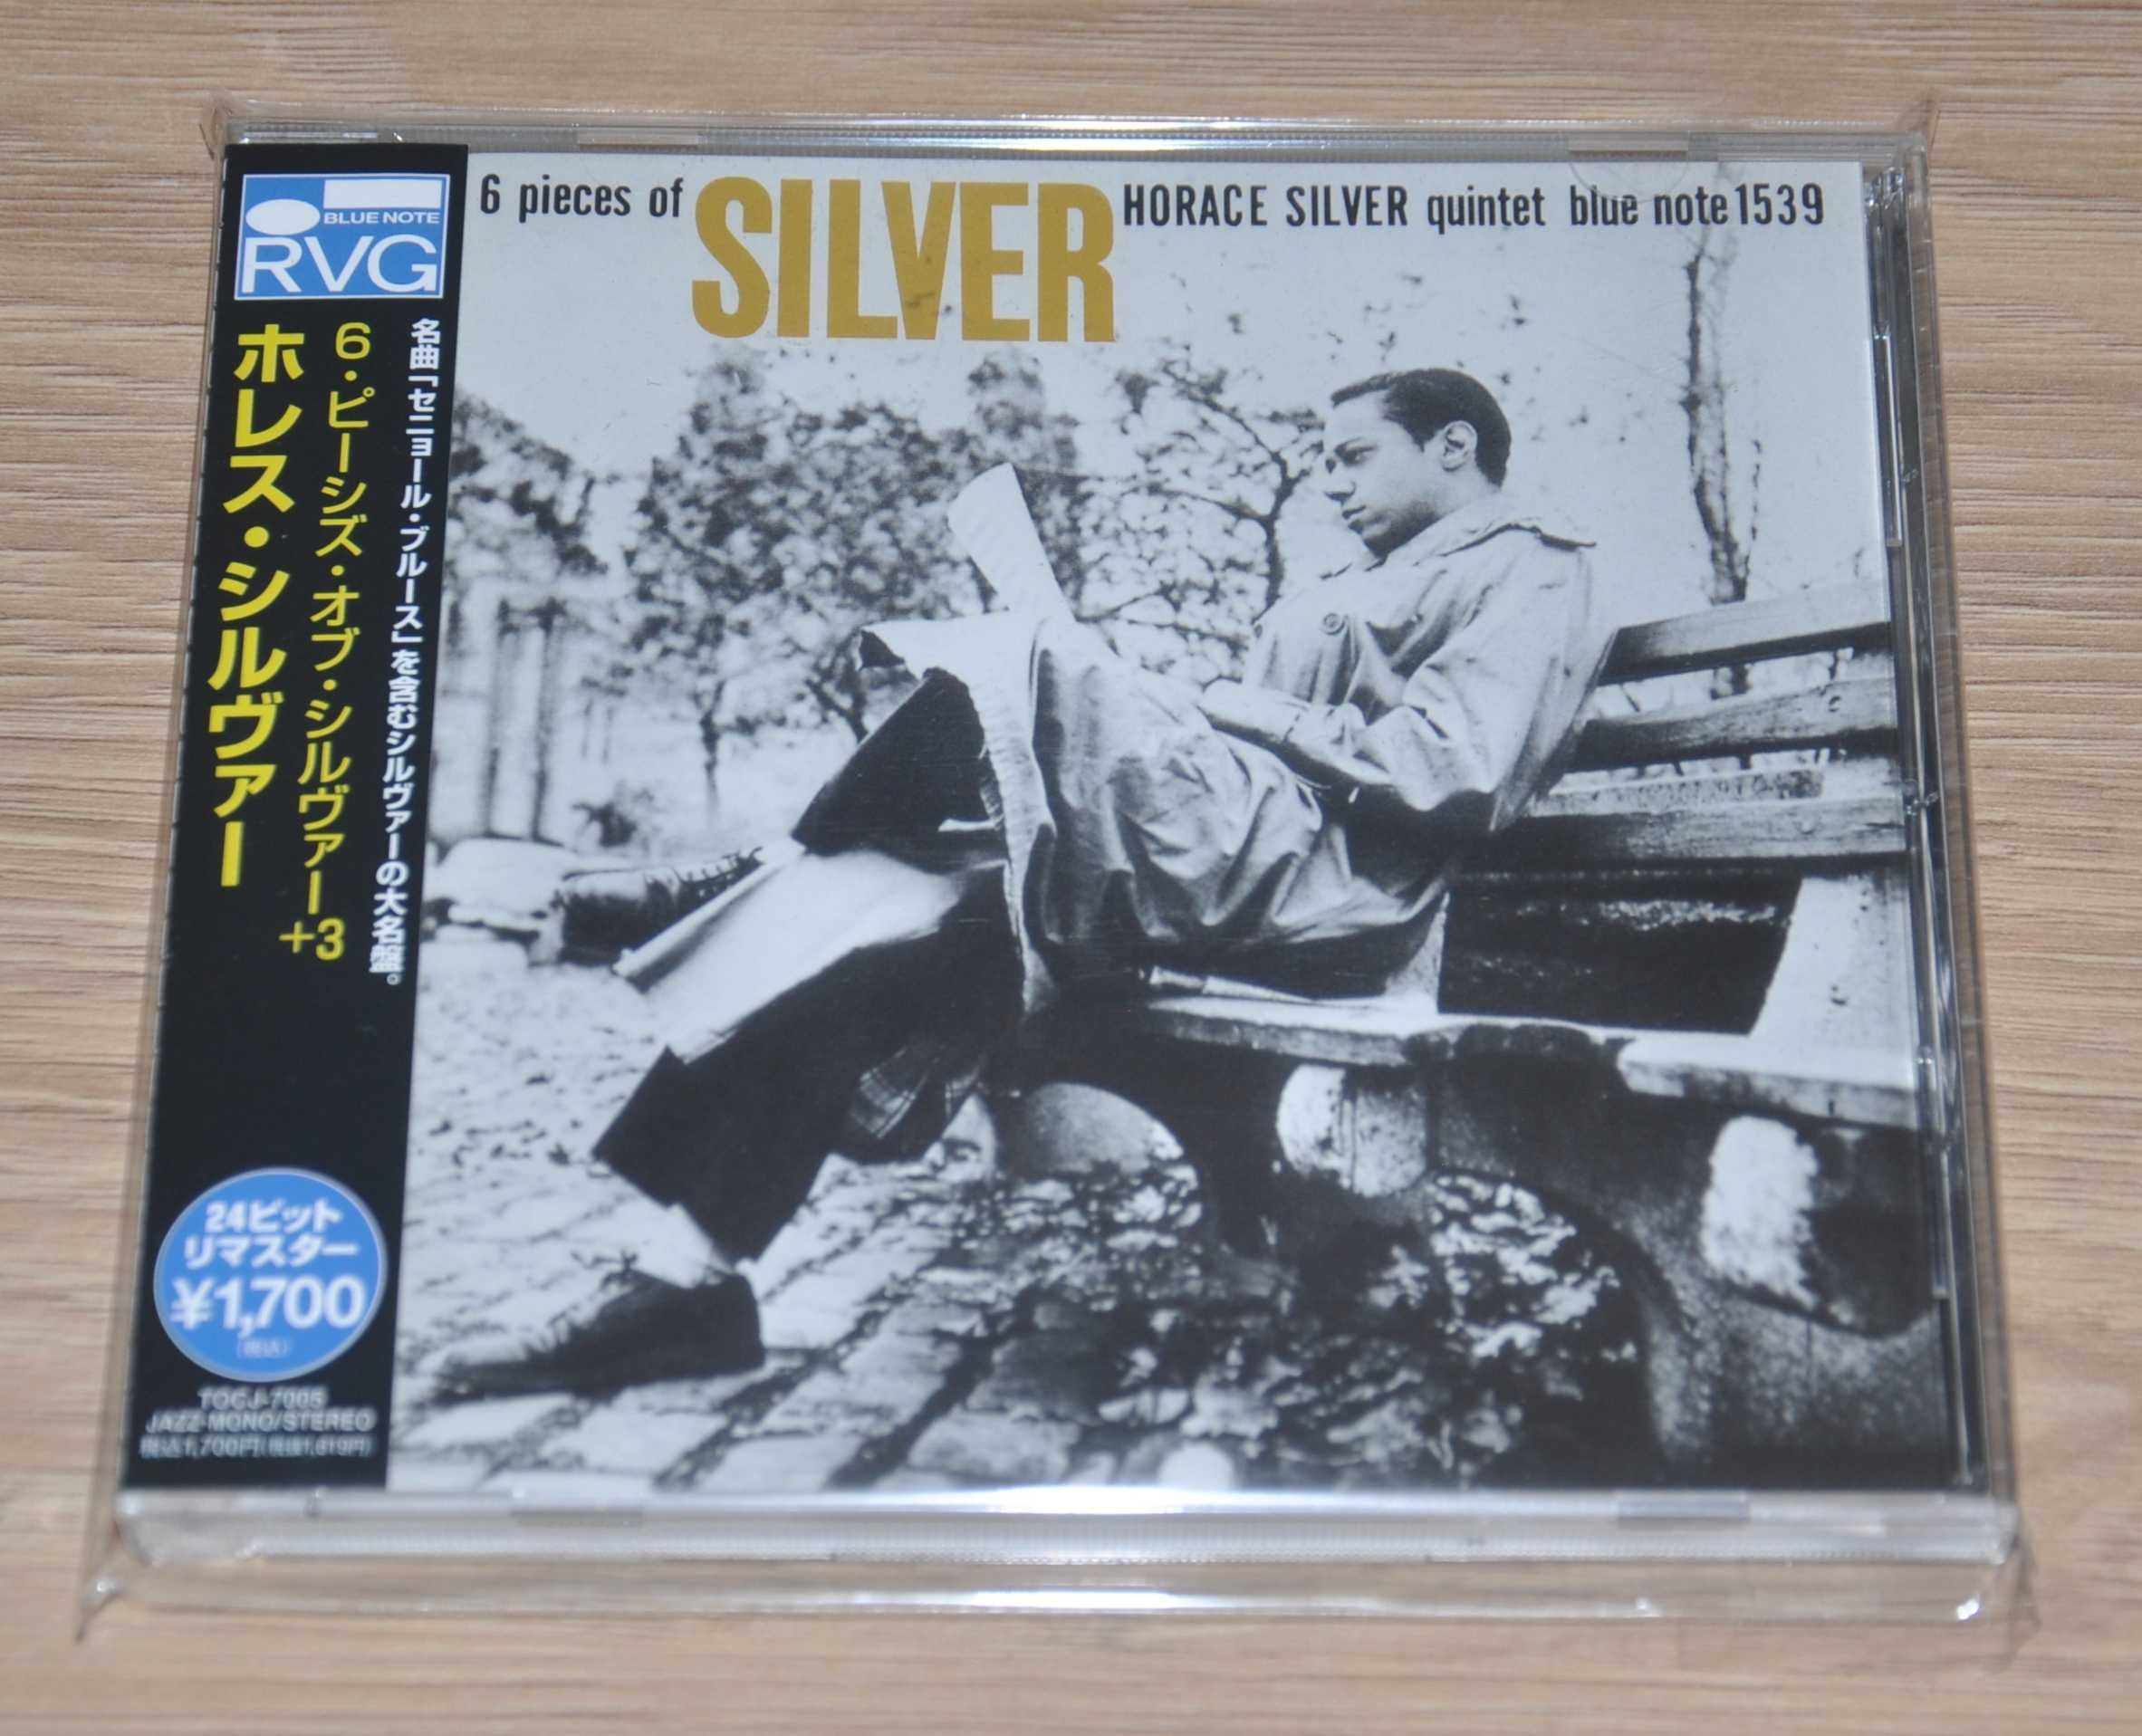 Horace Silver - Six Pieces of Silver - JAPAN CD jazz